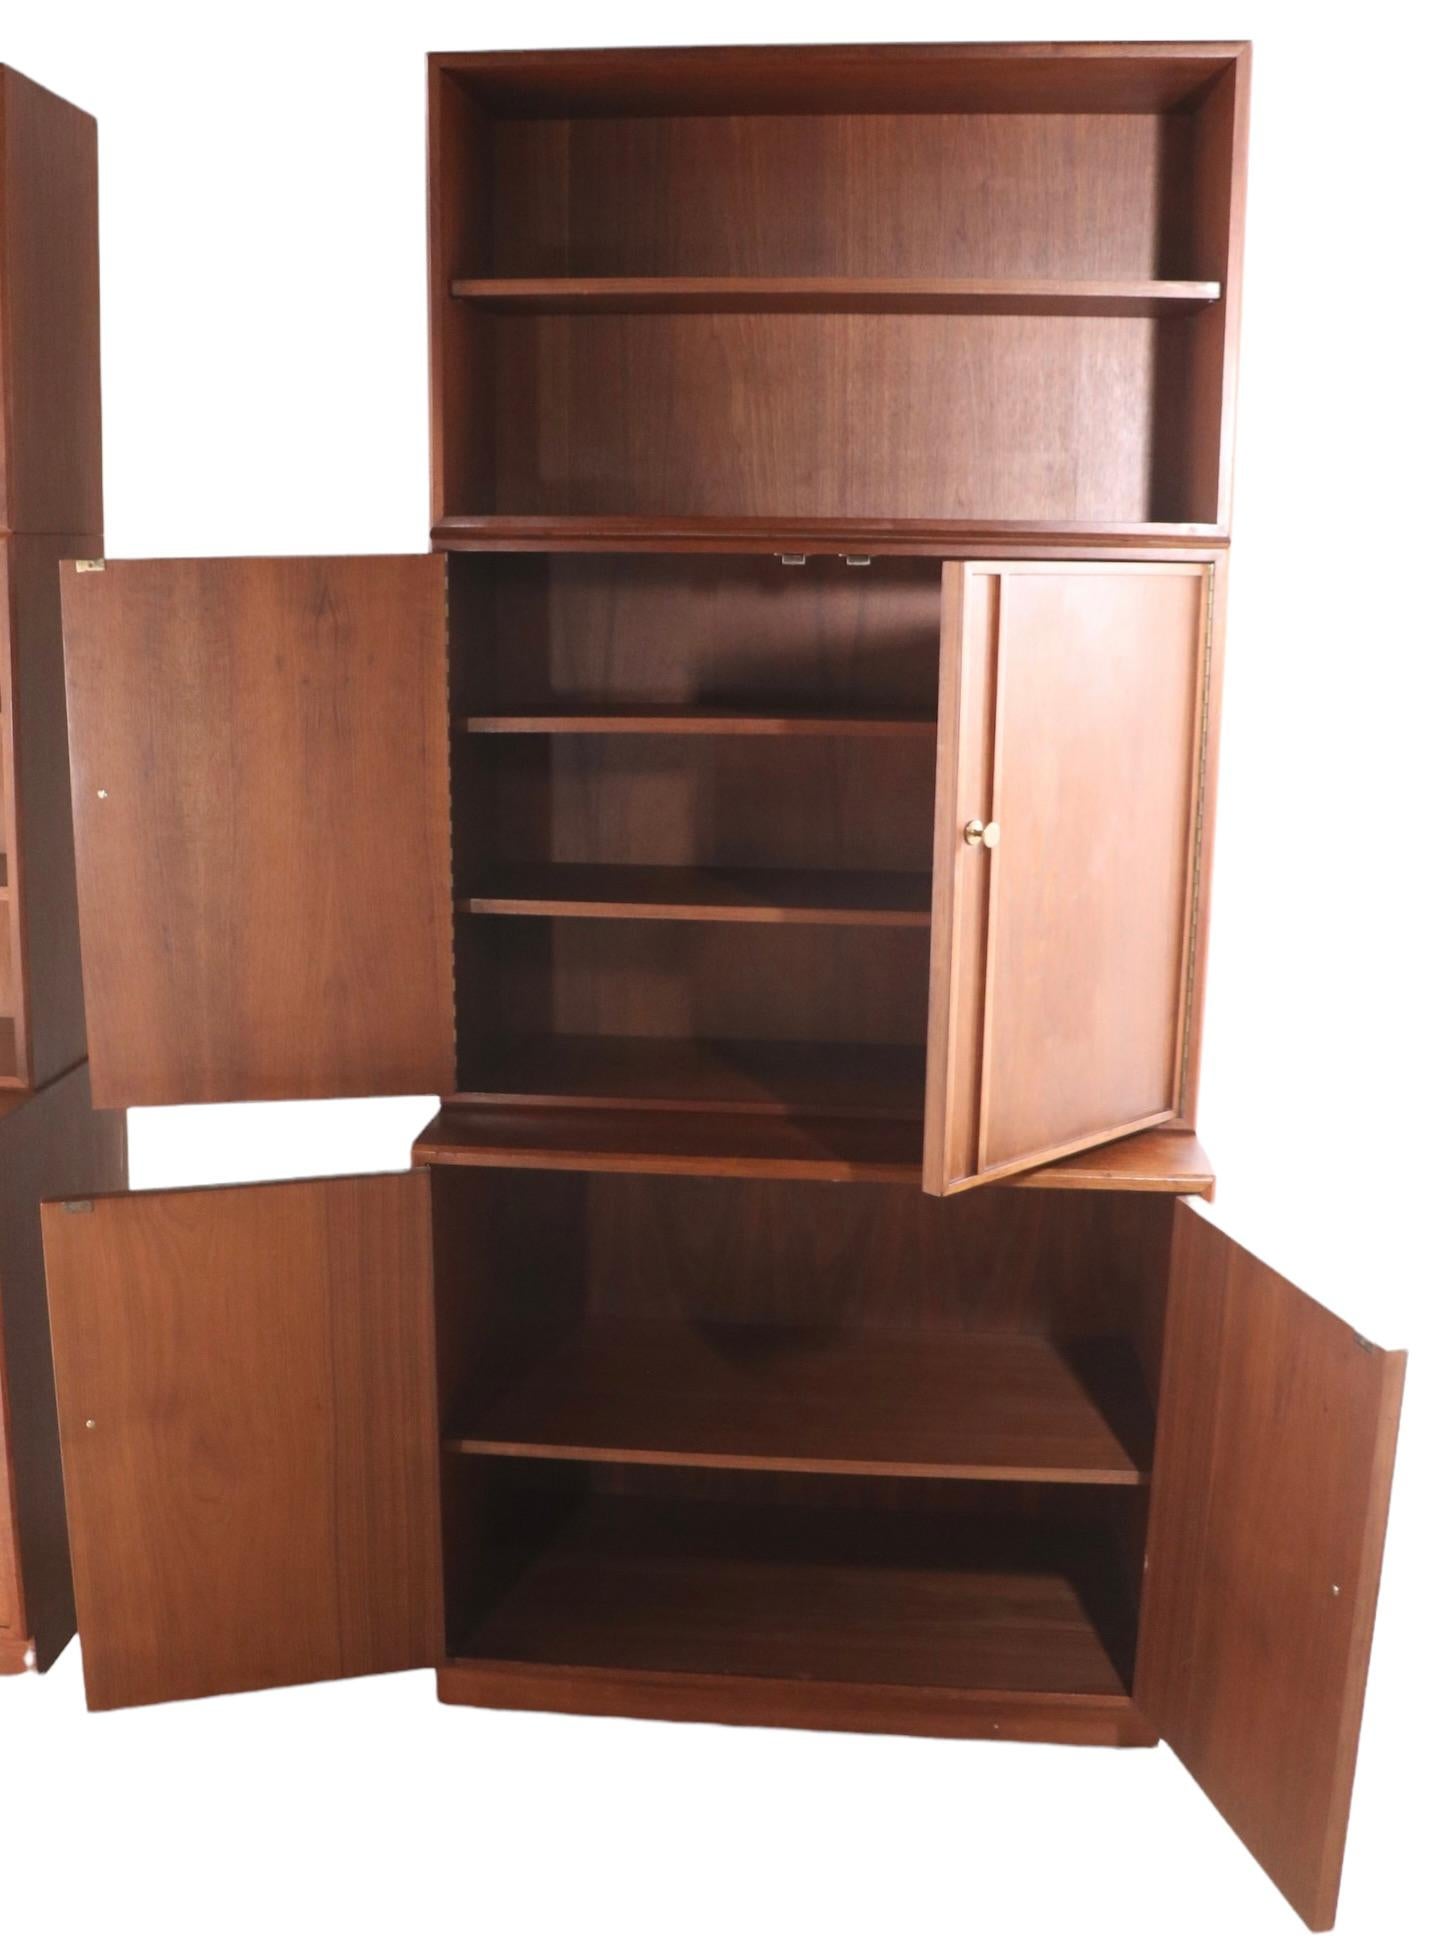 Impressive mid-century freestanding storage wall shelf unit manufactured by the West Michigan Furniture Company. The set includes three independent cabinets, two smaller side cabinets, and a larger ( wider ) center piece. Each cabinet consistent of